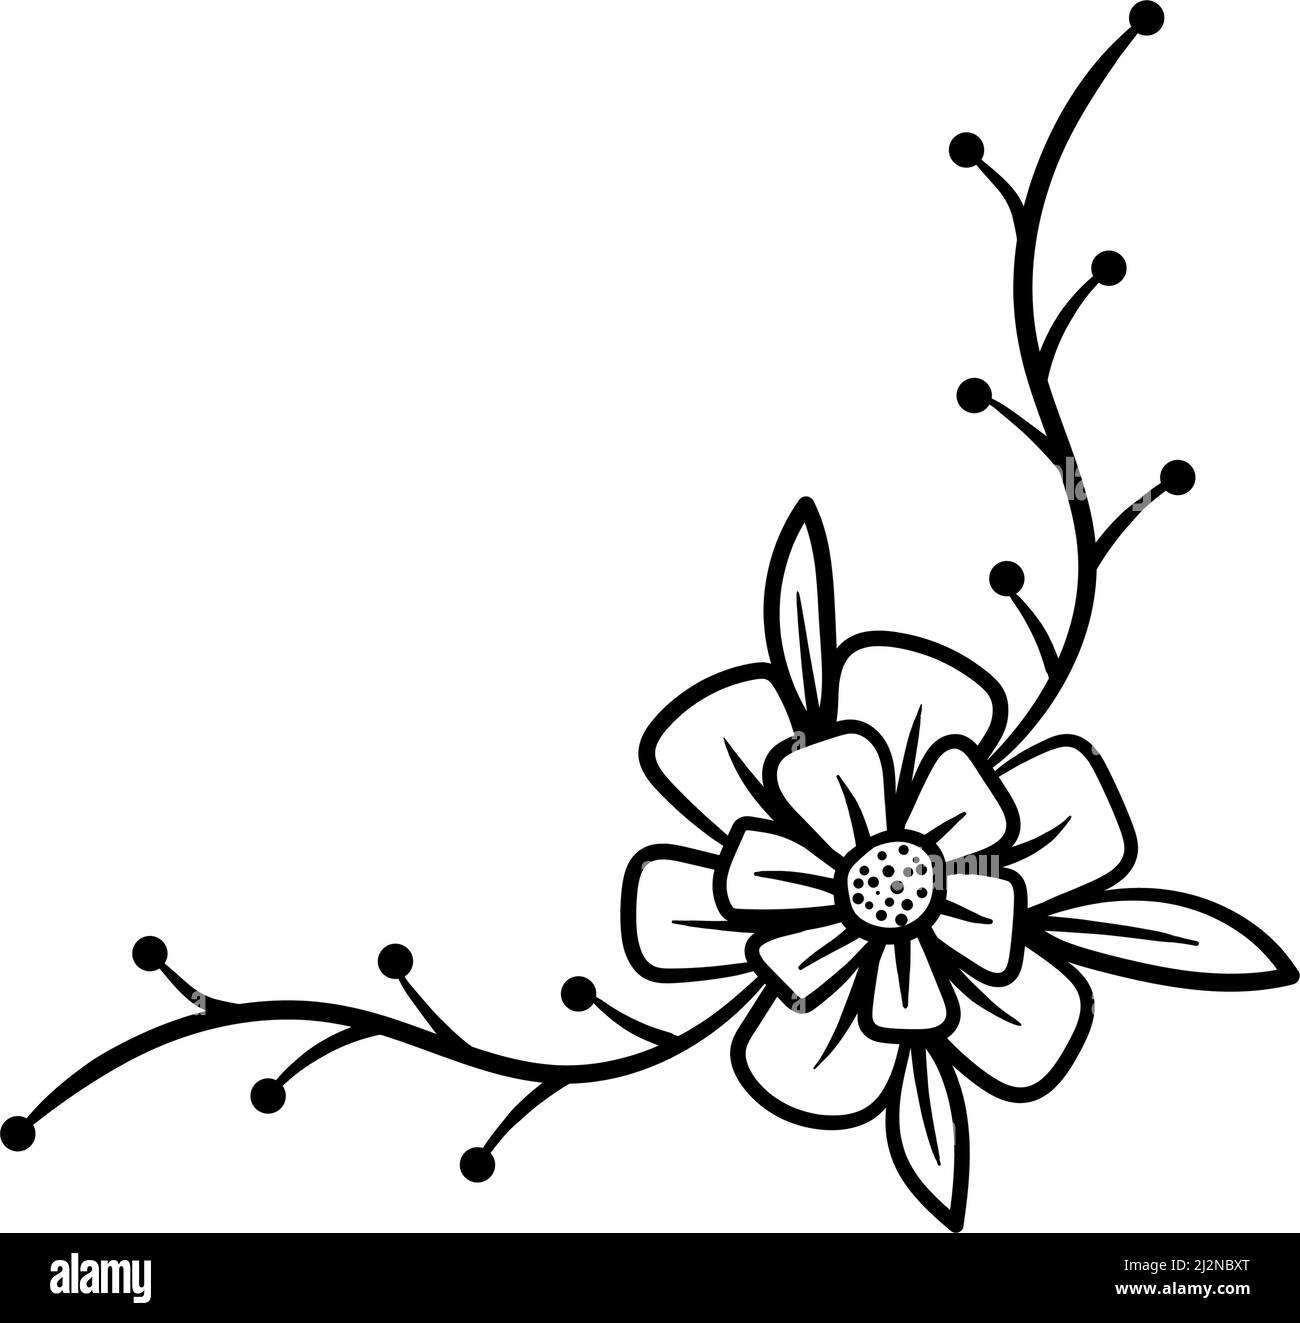 Simple line drawing floral composition with various big and small flowers  and leaves isolated on white background, warm ink drawing Stock Photo -  Alamy